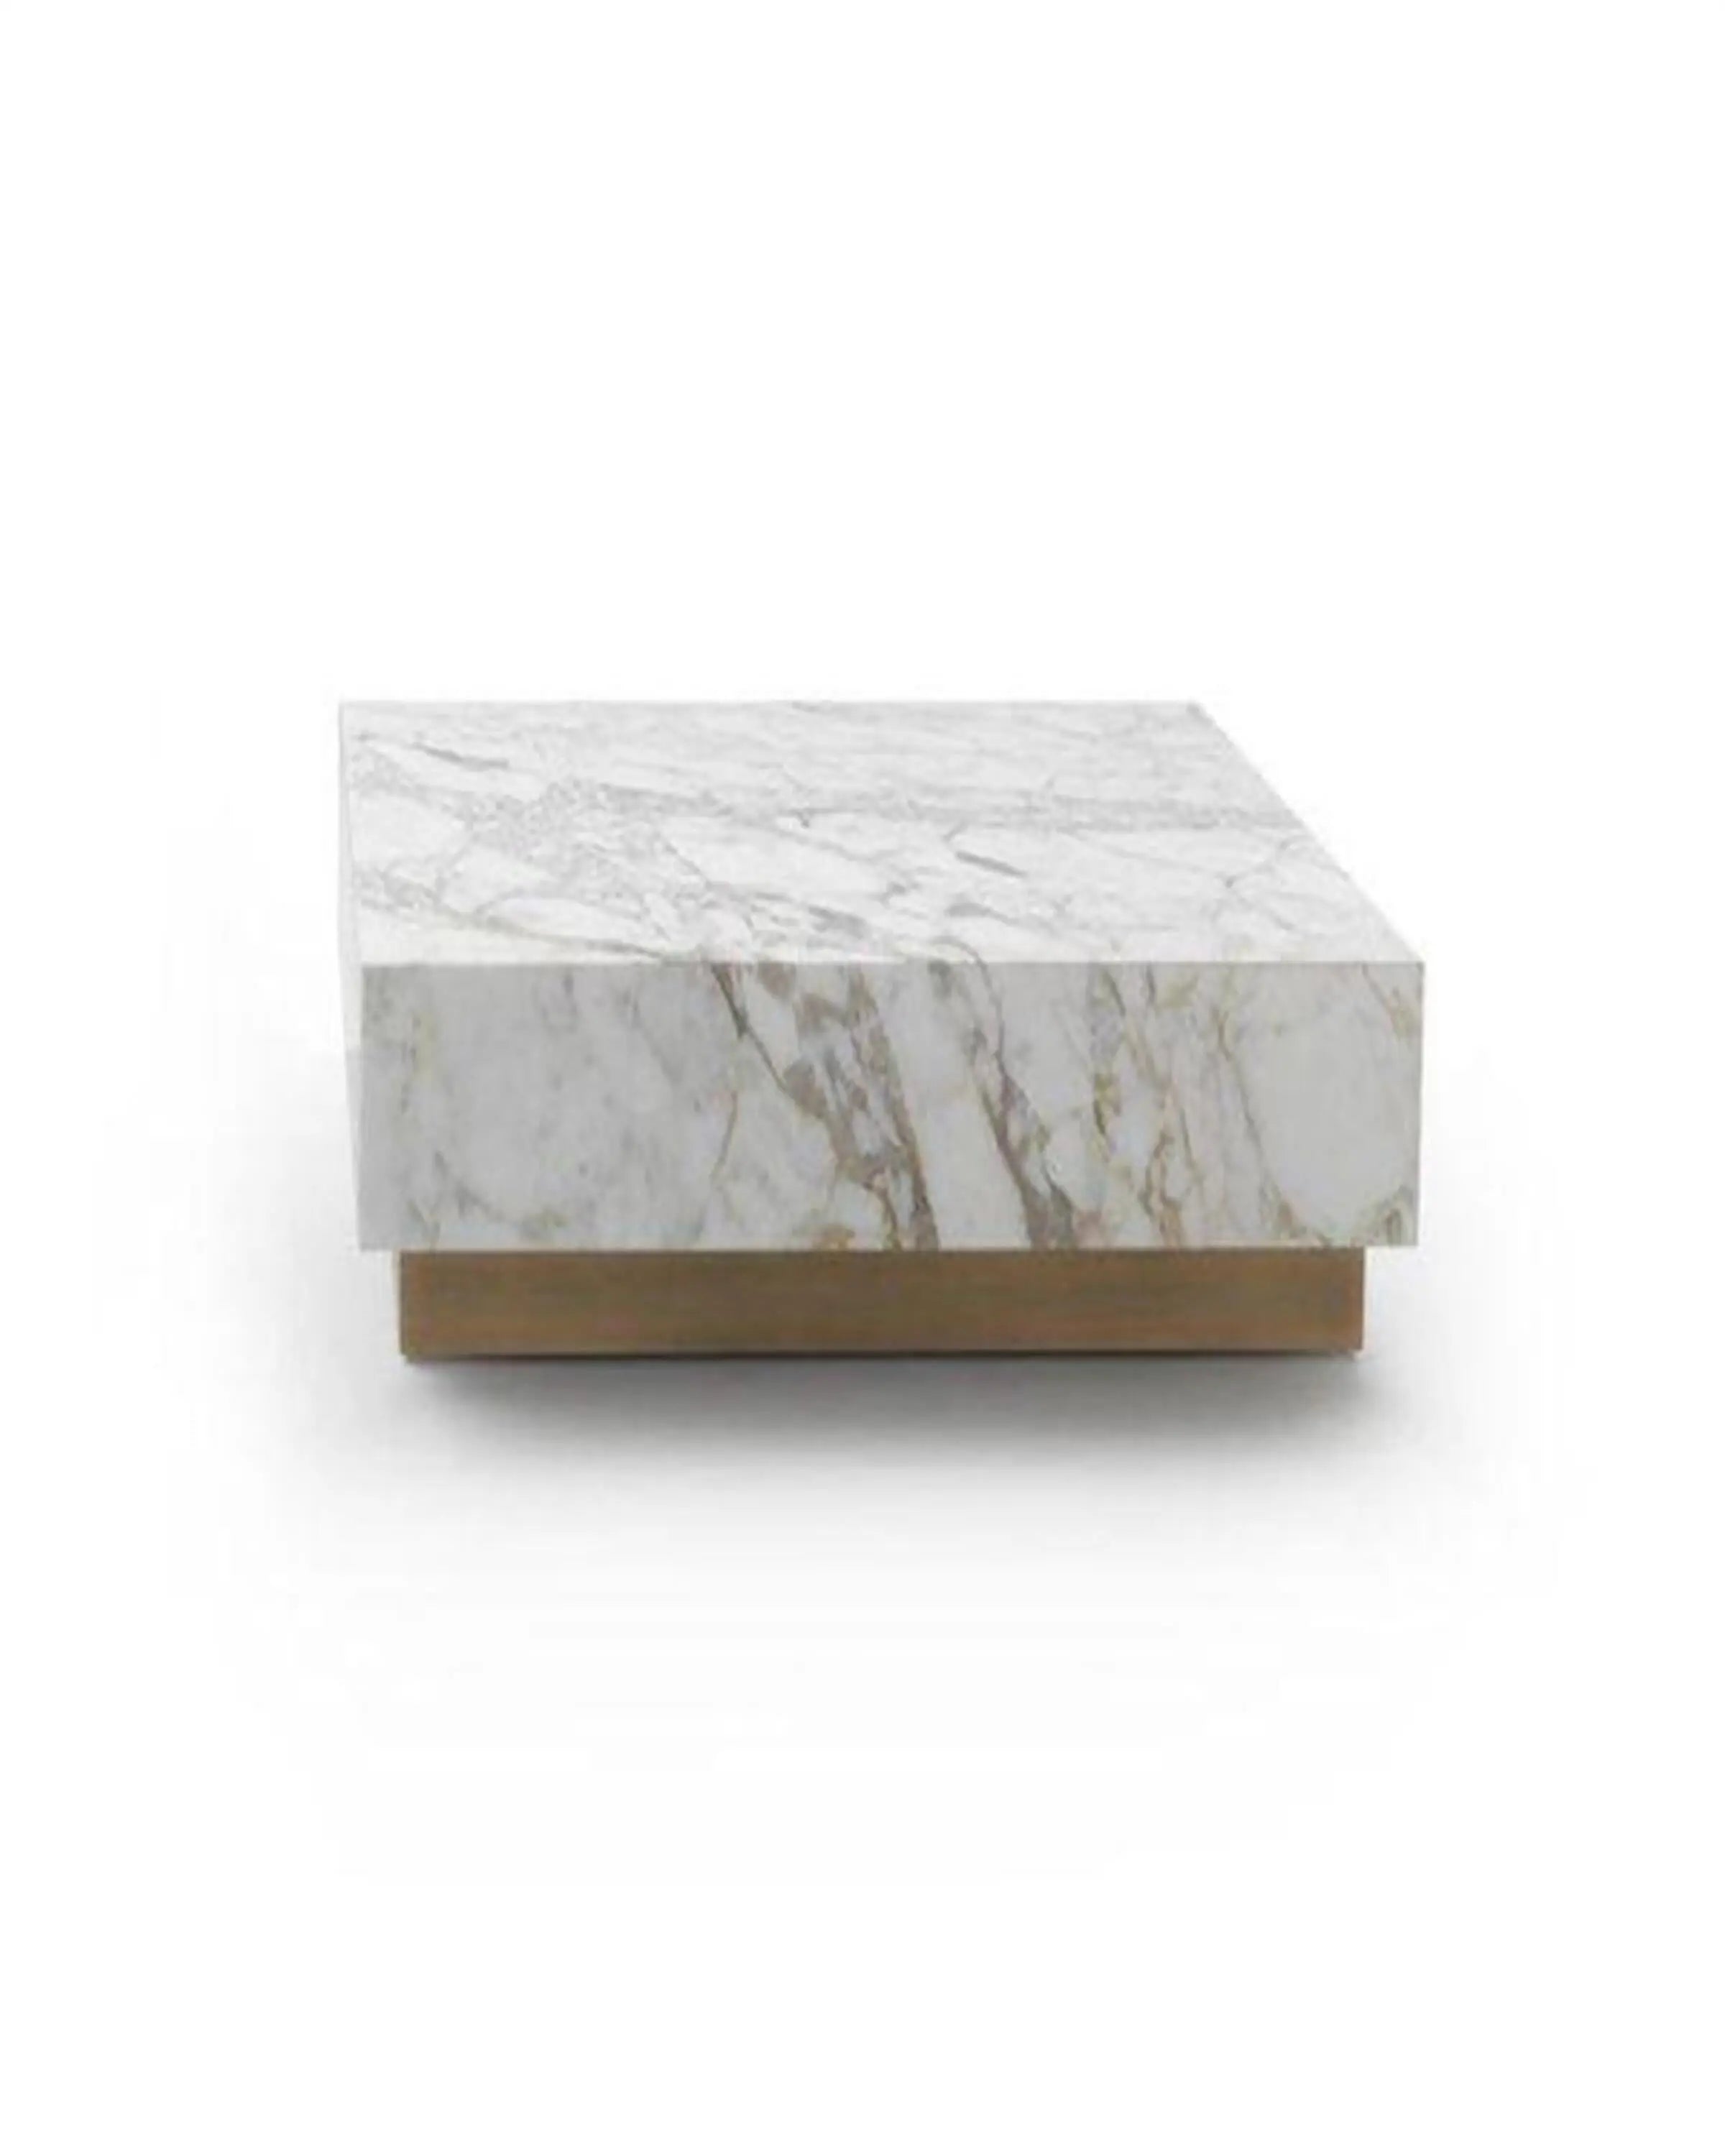 Von White Marble Coffee Table ANGIE HOMES